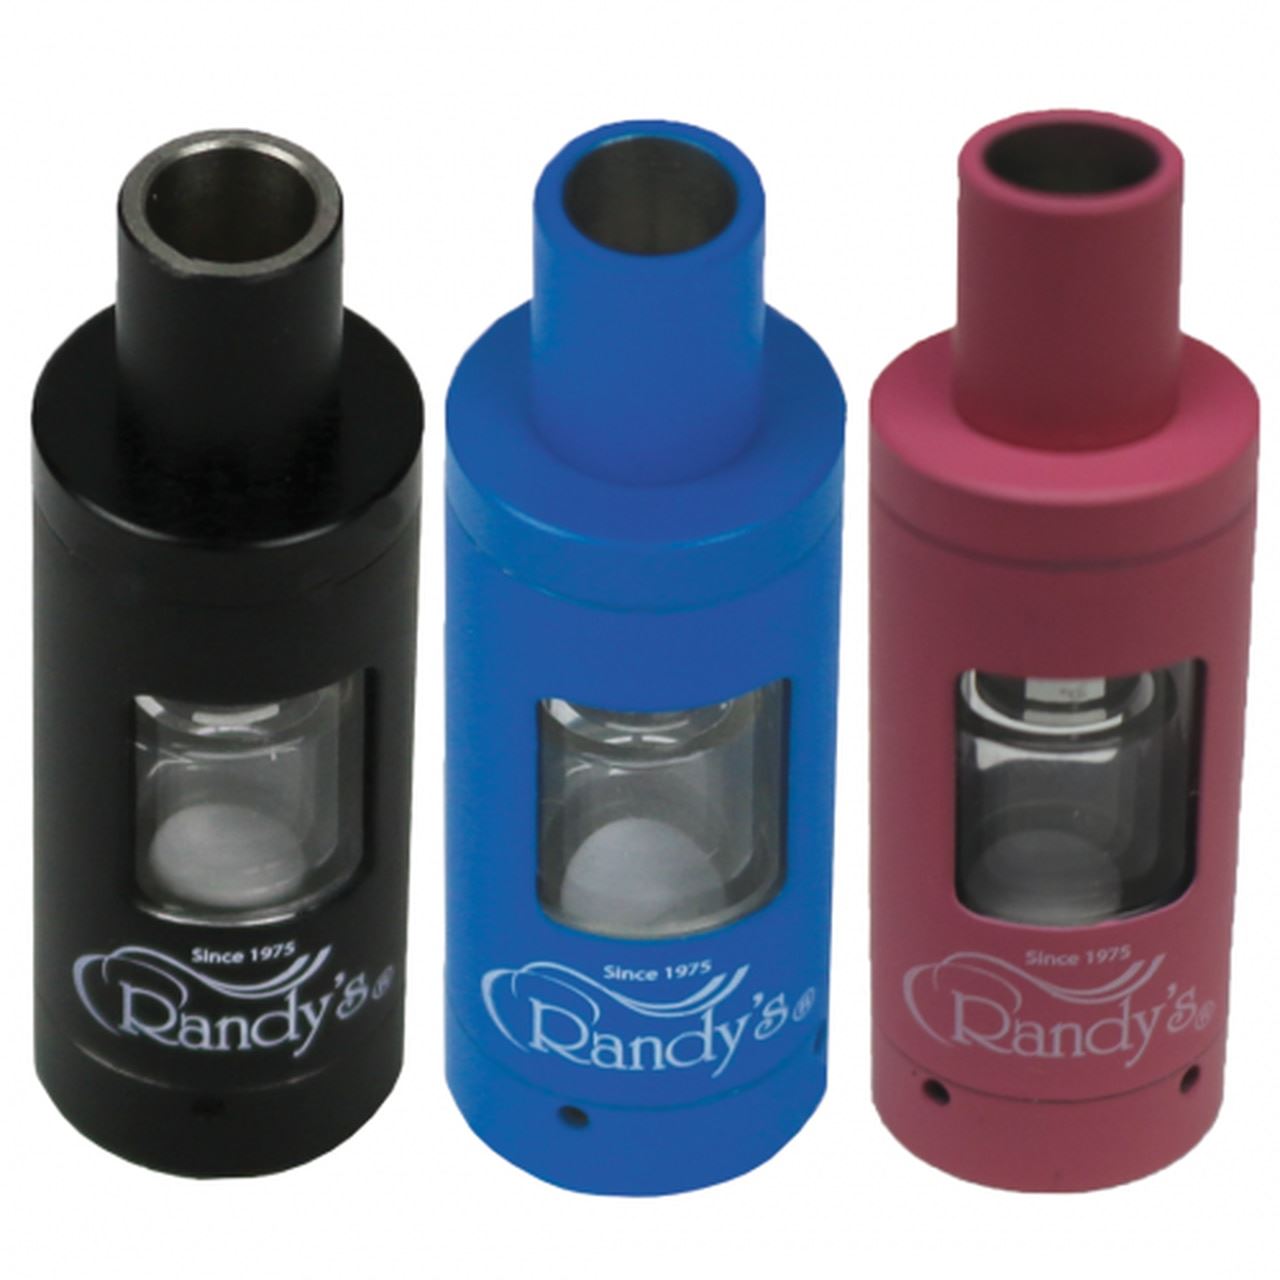 Randy's Drift Replacement Atomizer Flower Power Packages Black 